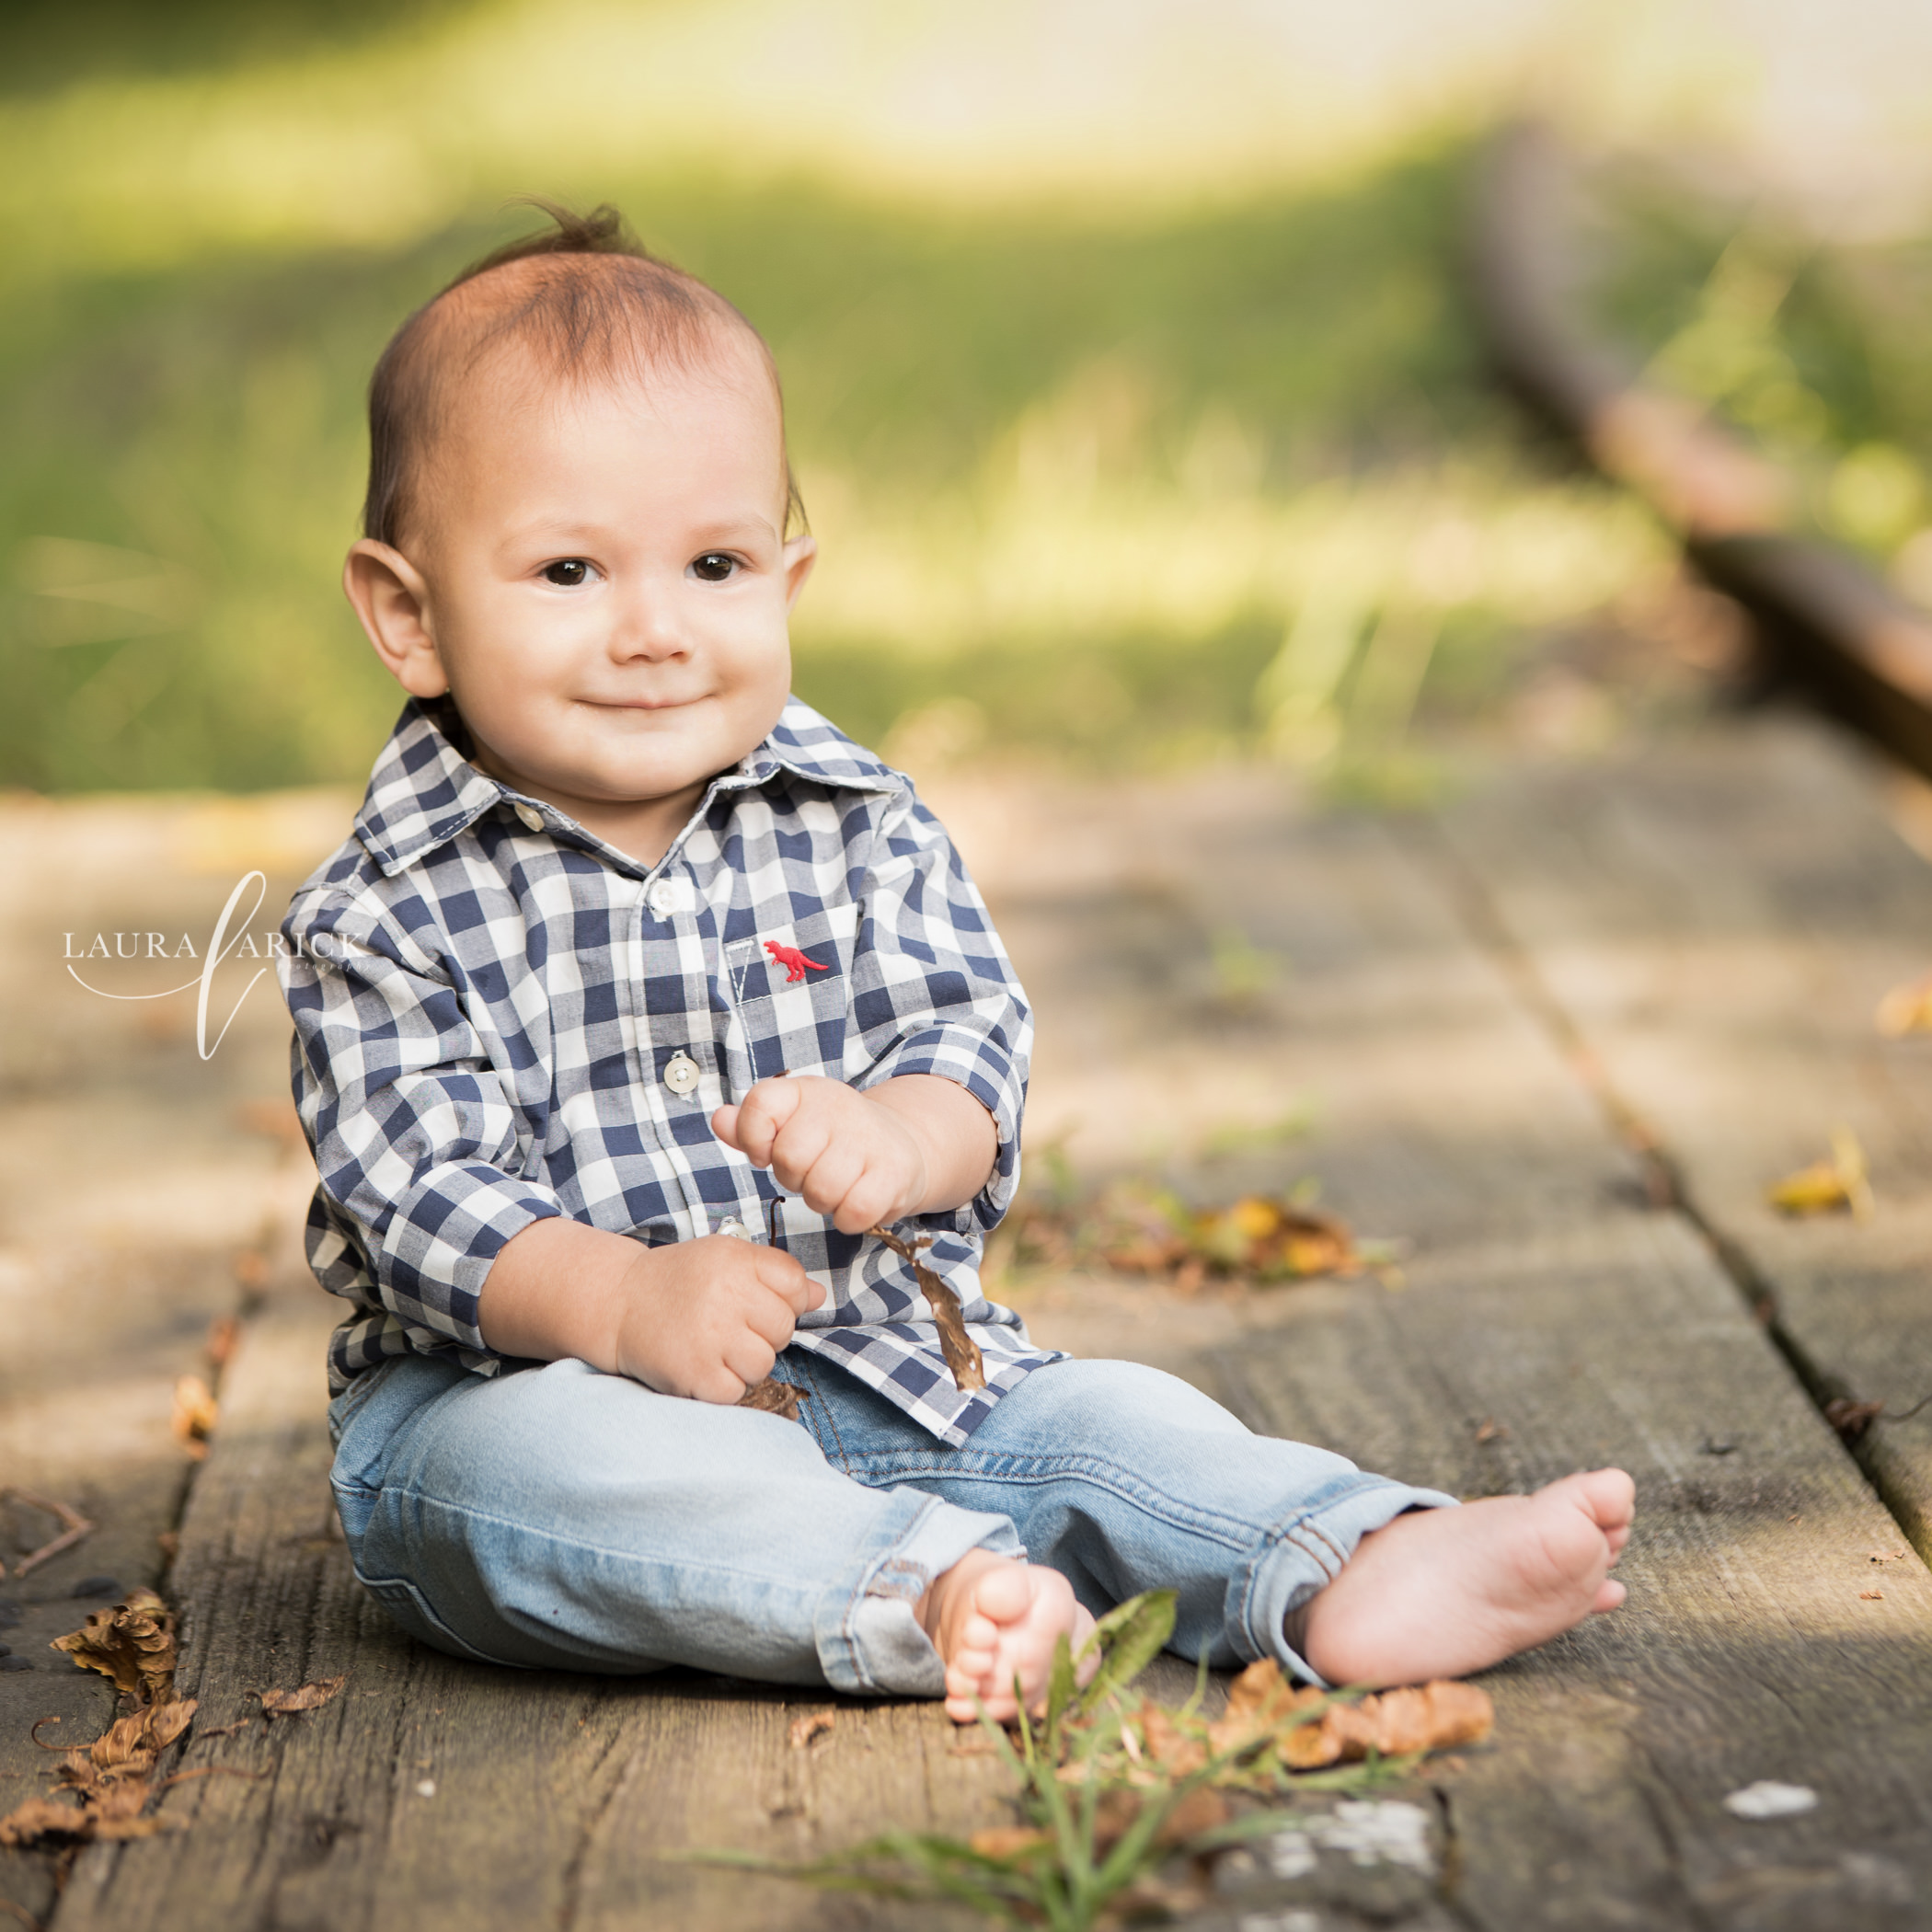 Recent Newborn Photo Sessions Archives - Laura Arick Photography